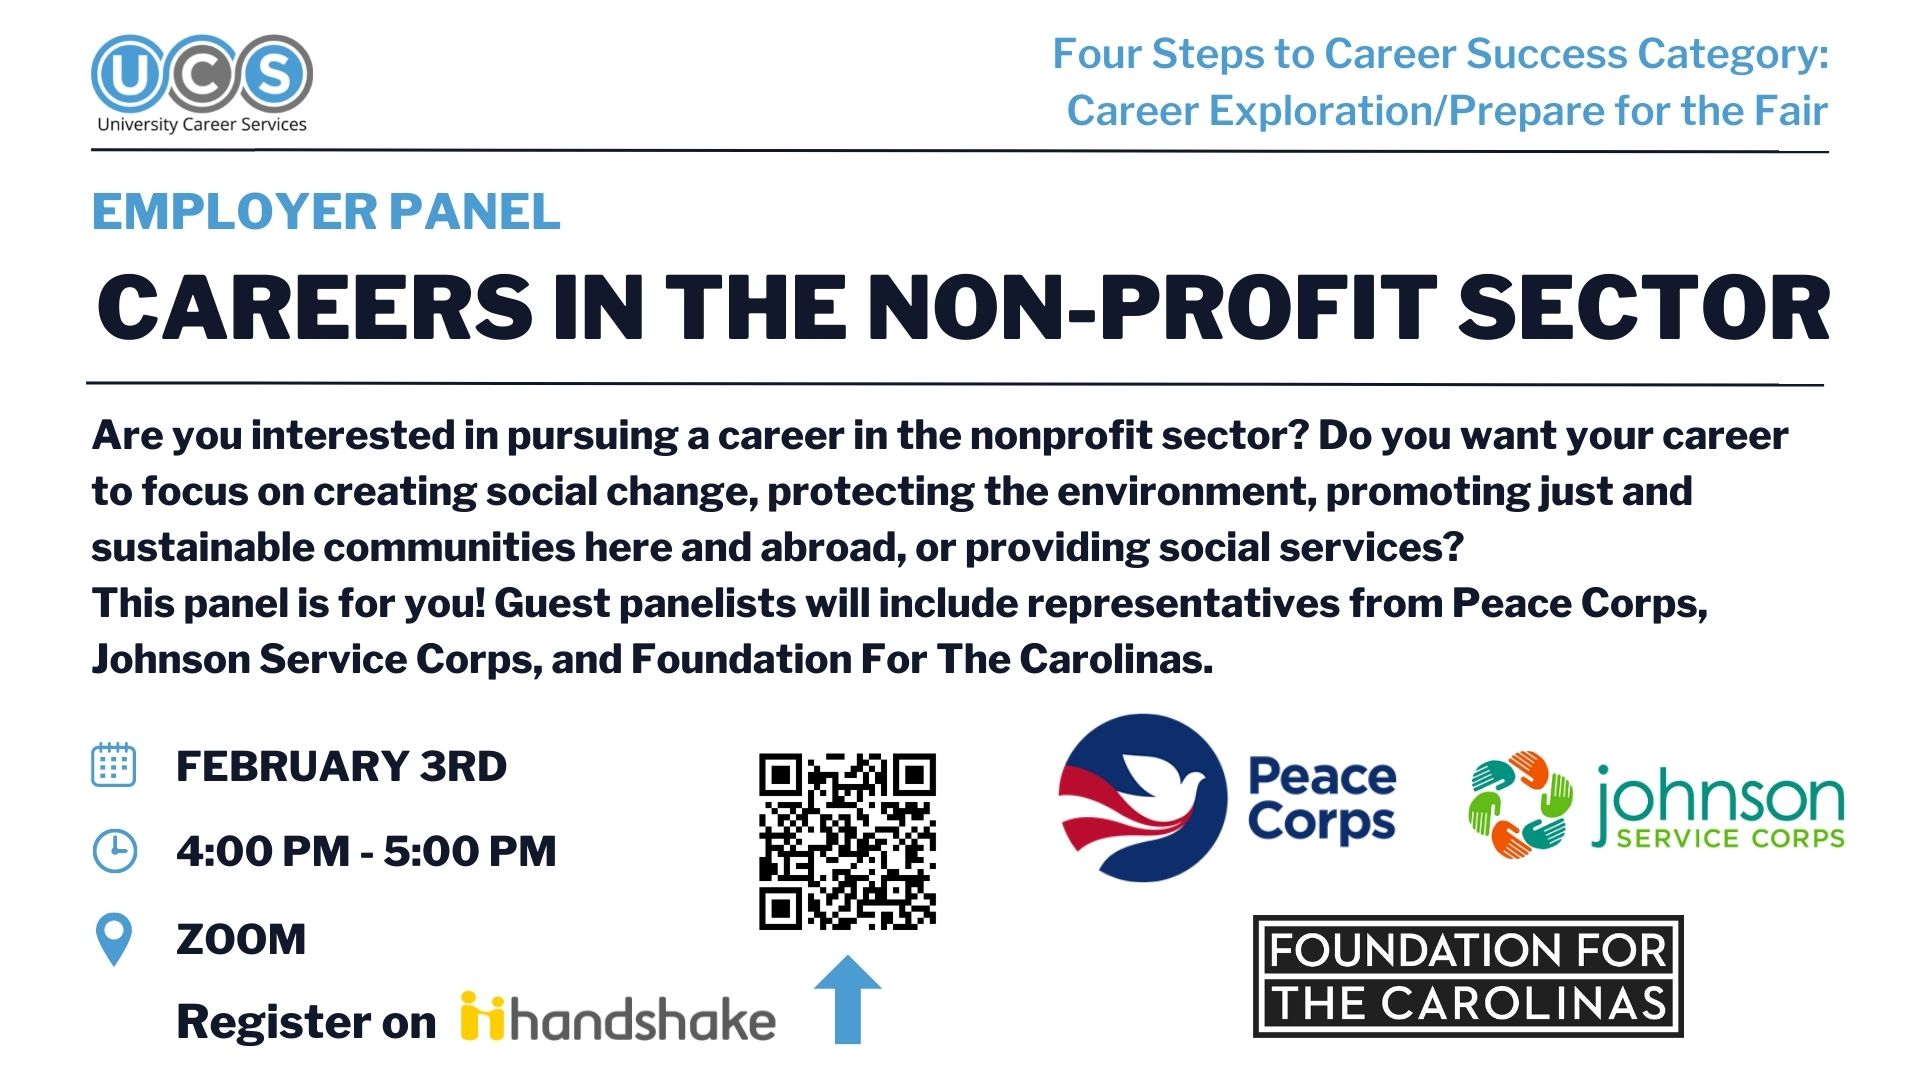 Are you interested in pursuing a career in the nonprofit sector? Do you want your career to focus on creating social change, protecting the environment, promoting just and sustainable communities here and abroad, or providing social services?  This panel 